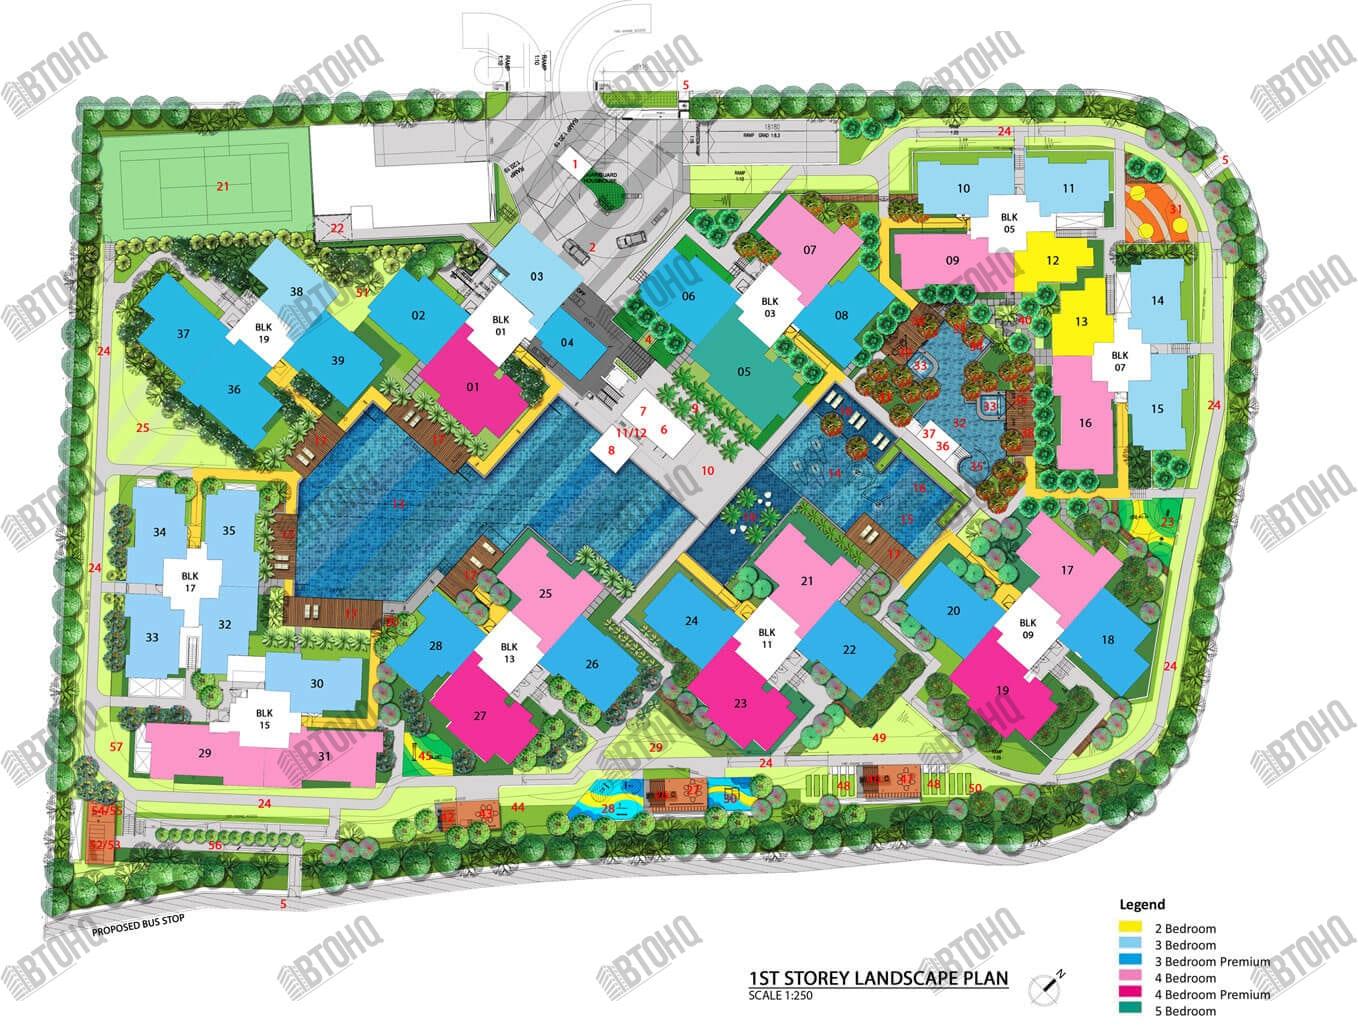 The Criterion Site Plan